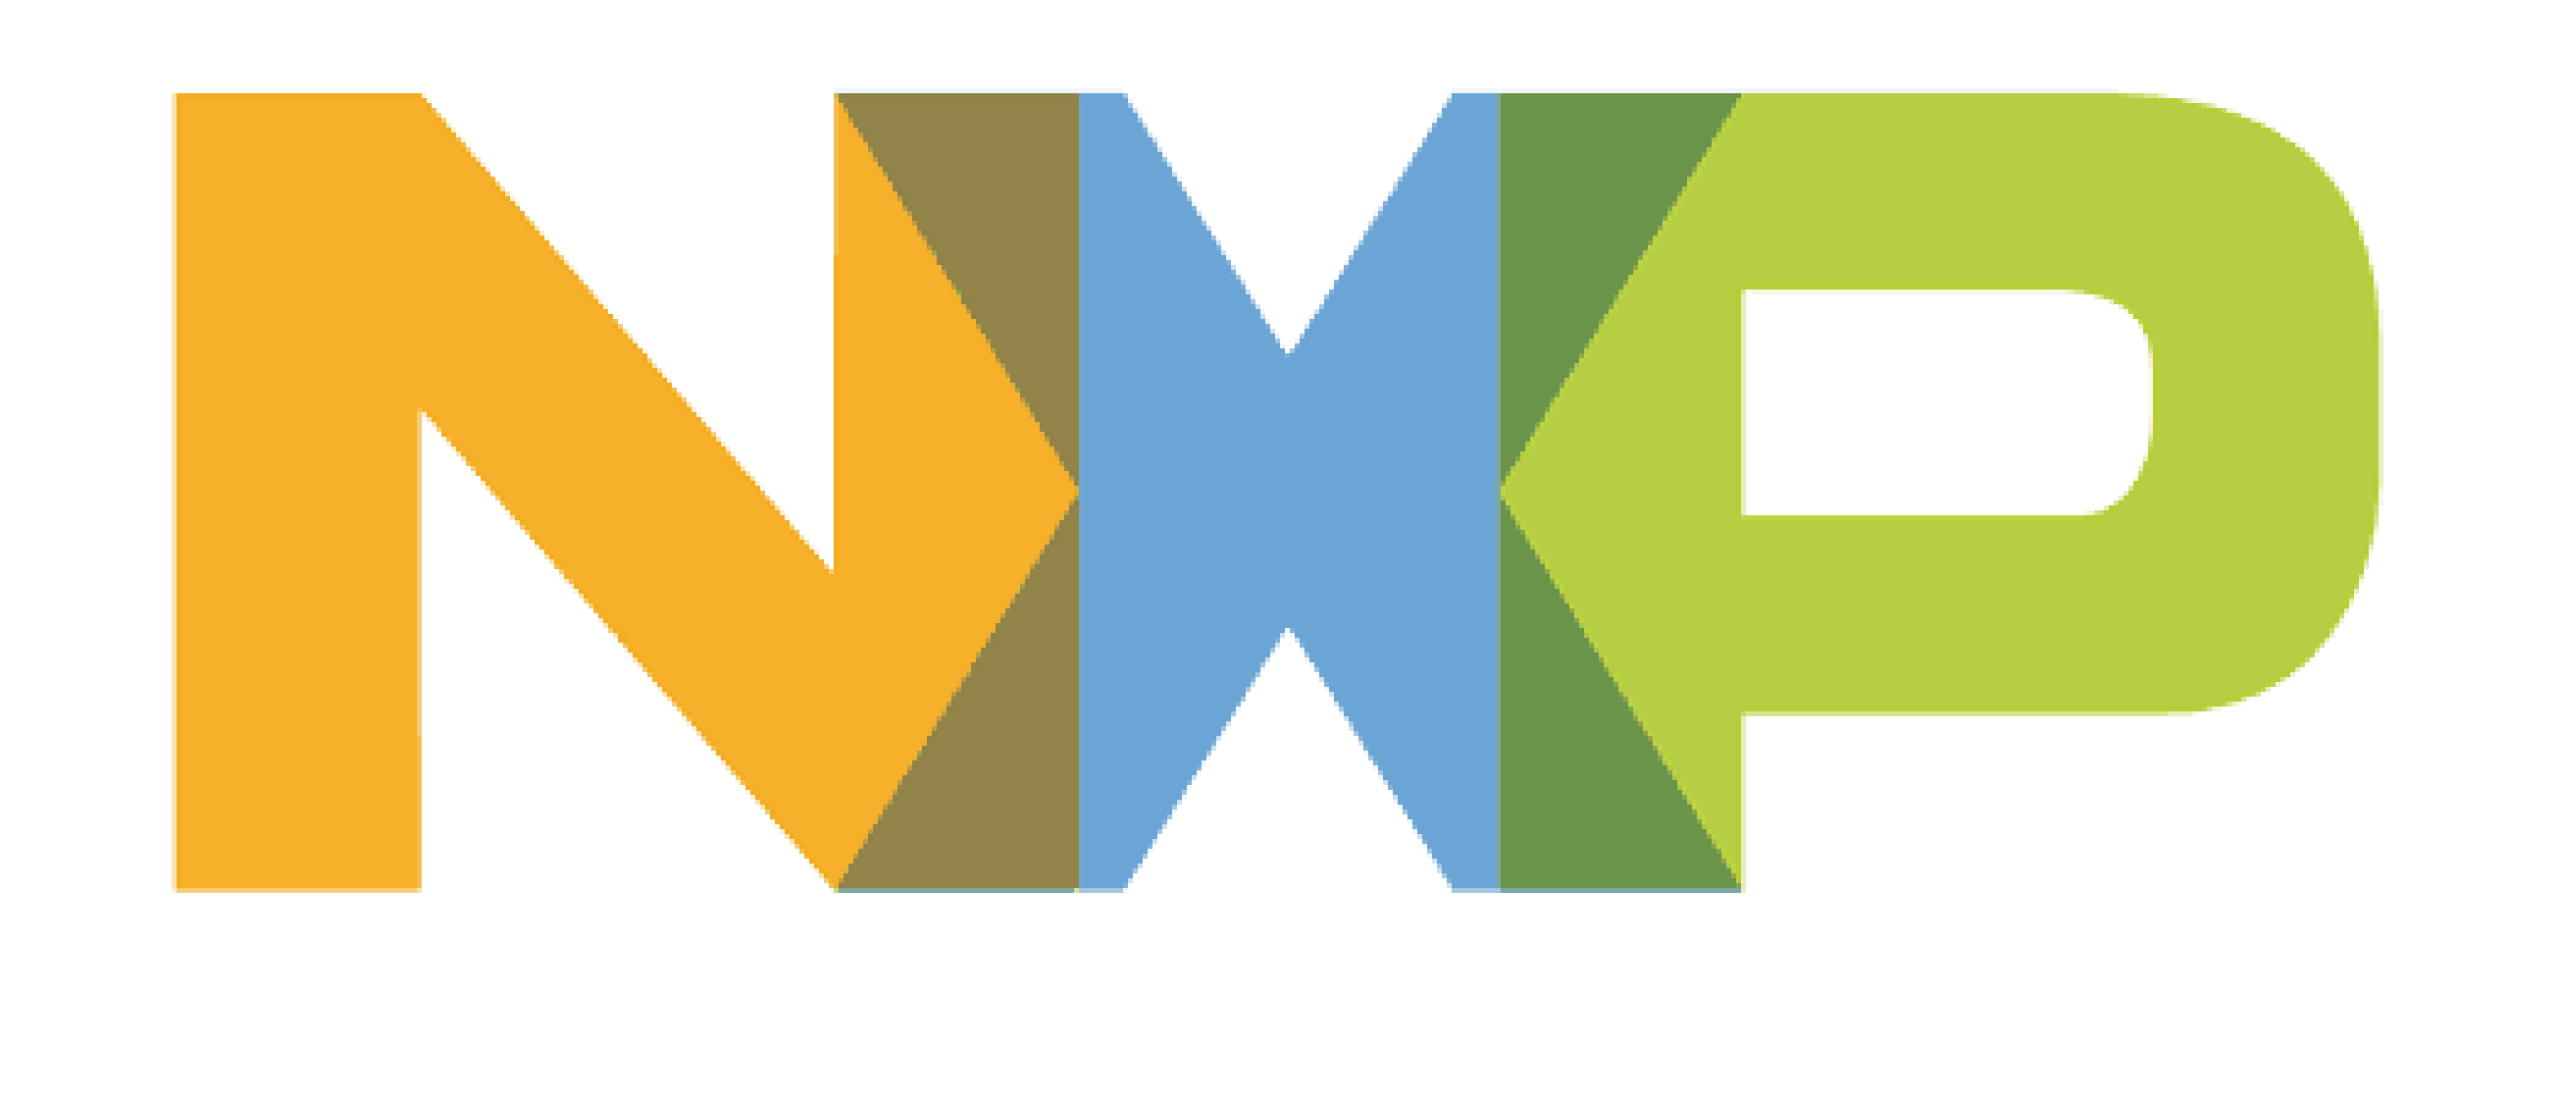 NXP - Netherlands | Merger & acquisition applications